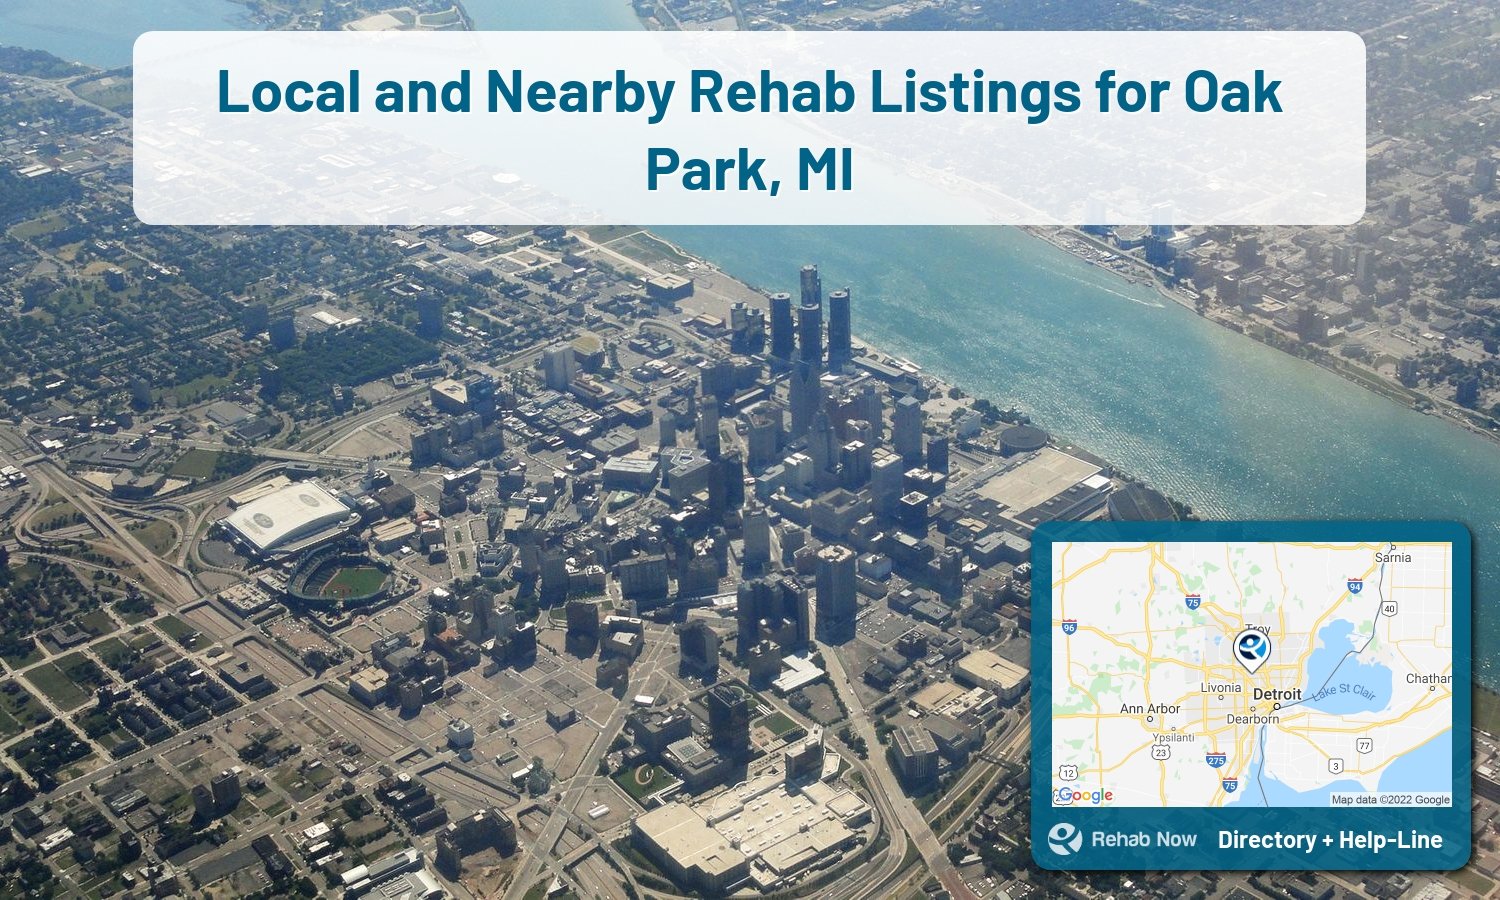 Oak Park, MI Treatment Centers. Find drug rehab in Oak Park, Michigan, or detox and treatment programs. Get the right help now!